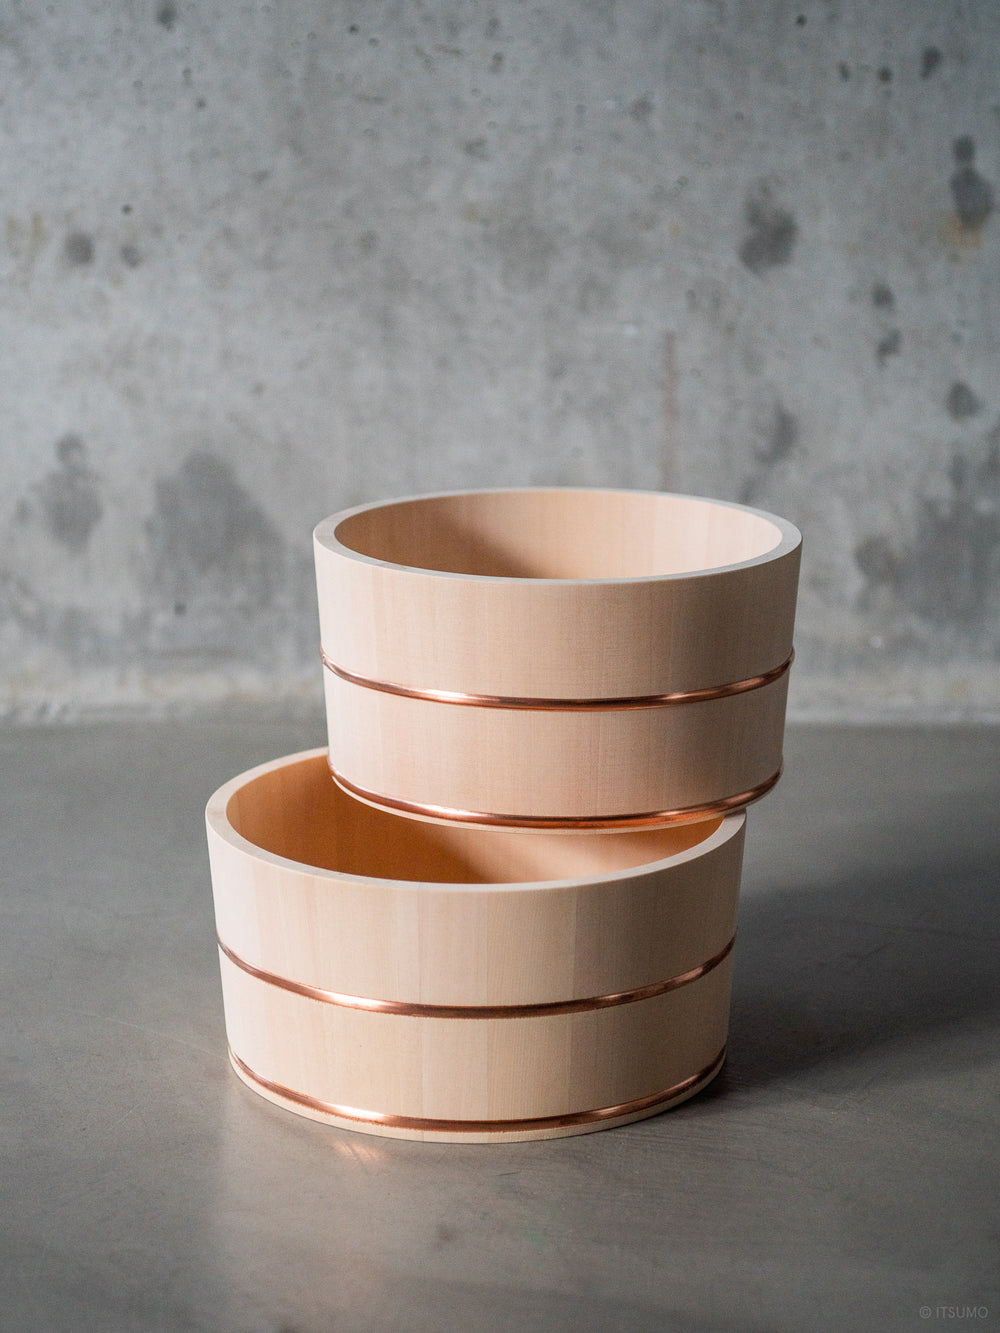 Two Azmaya hinoki wood bath bowls with copper trim around the middle and bottom